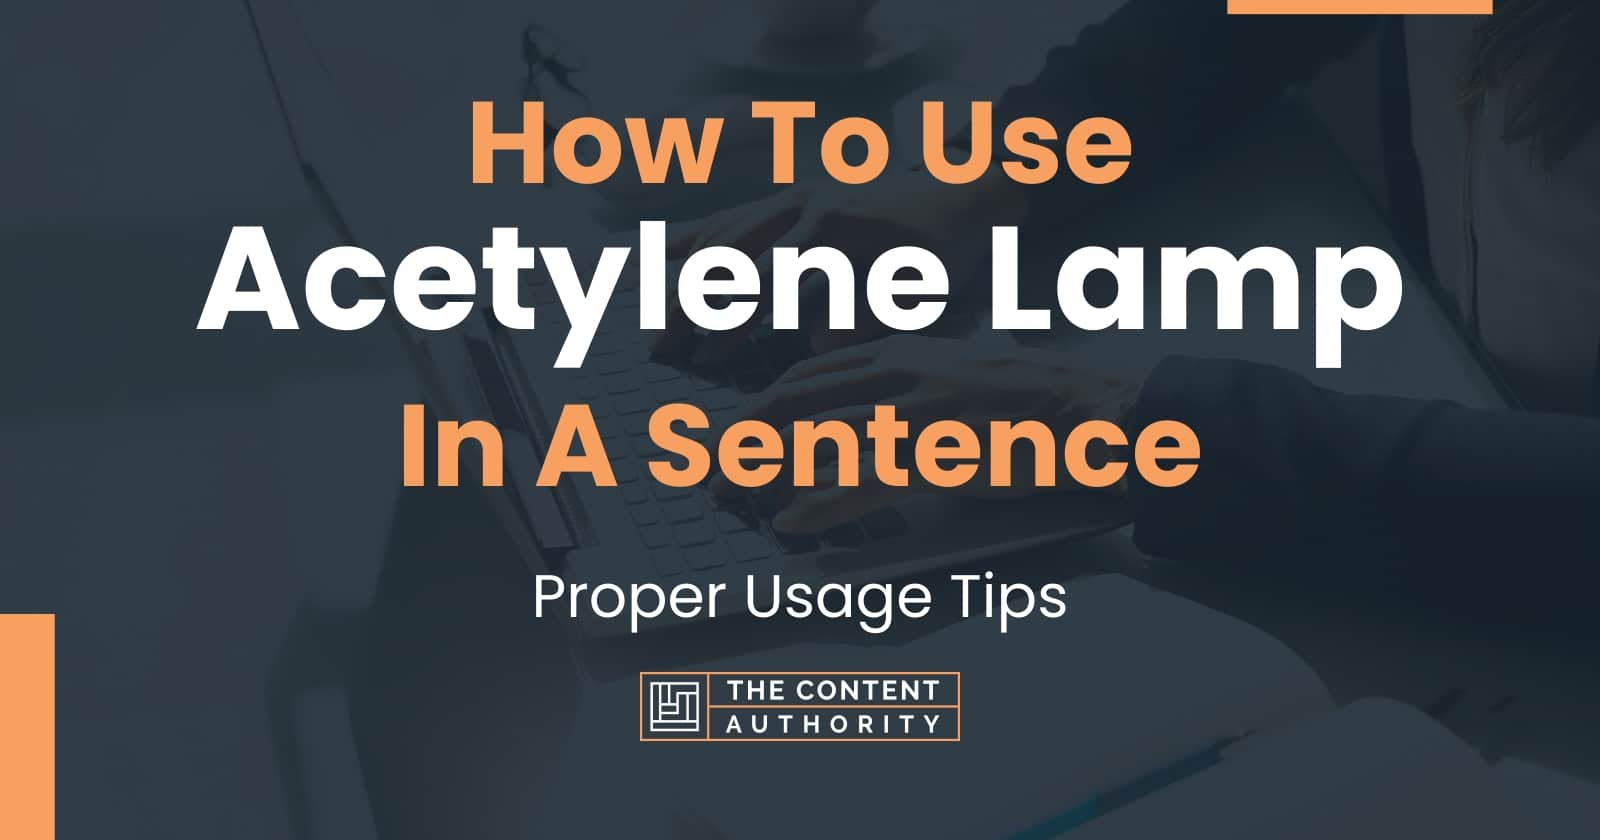 How To Use Acetylene Lamp In A Sentence 